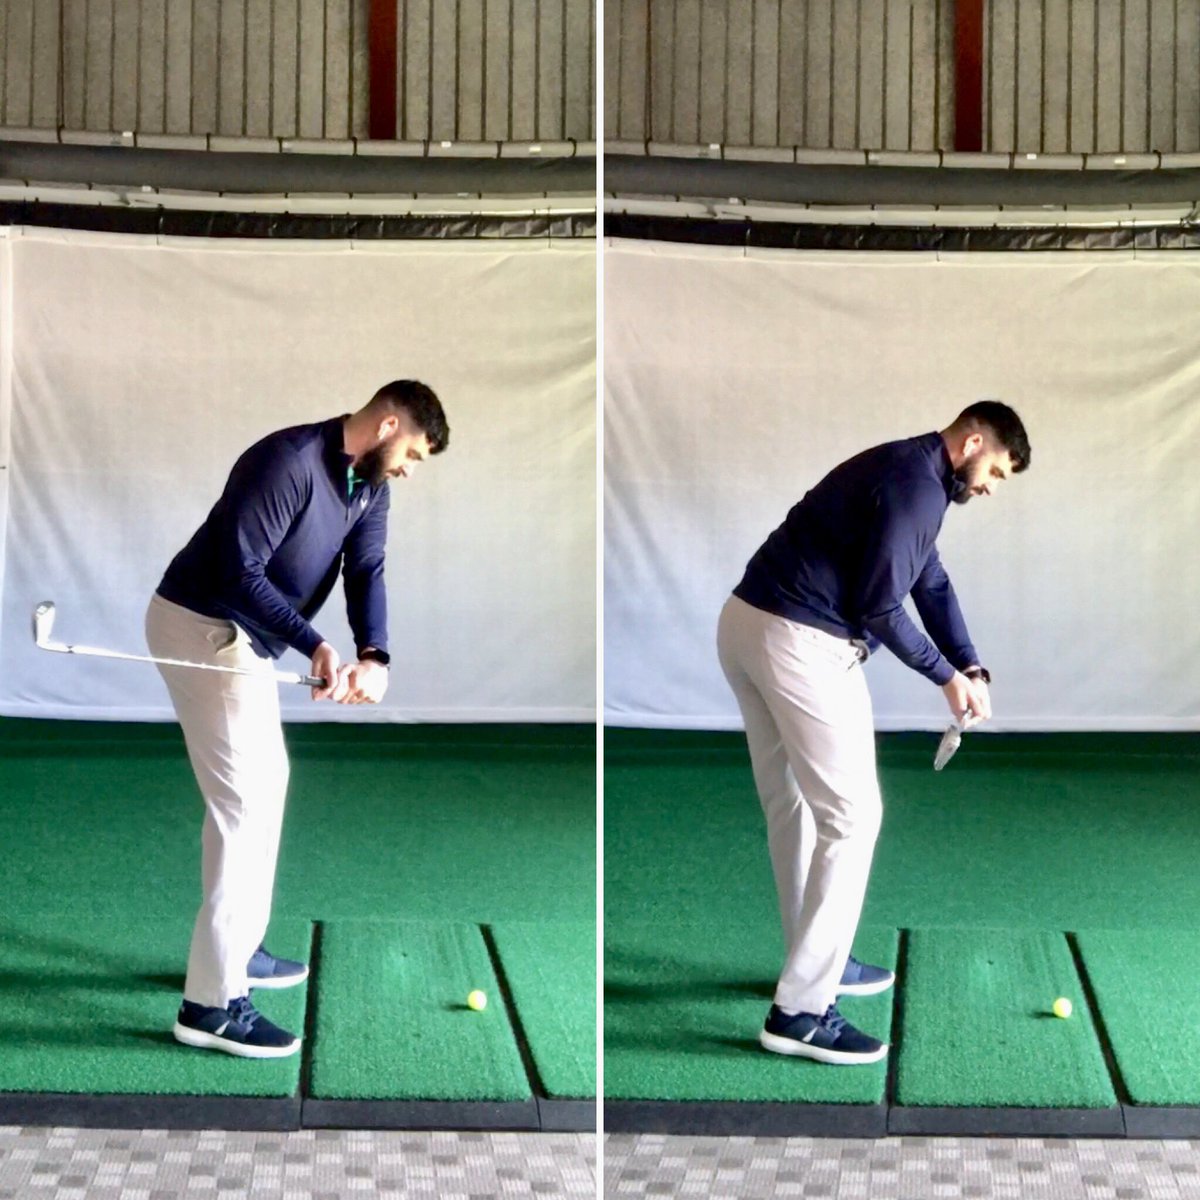 DOWNSWING ROTATION ✅ The following visual an extreme version of the difference, but a big reason why many coaches nowadays like to see their golfers shallow the club in transition is because it will incentivize the body to rotate open, similar to the visual you see on the RIGHT